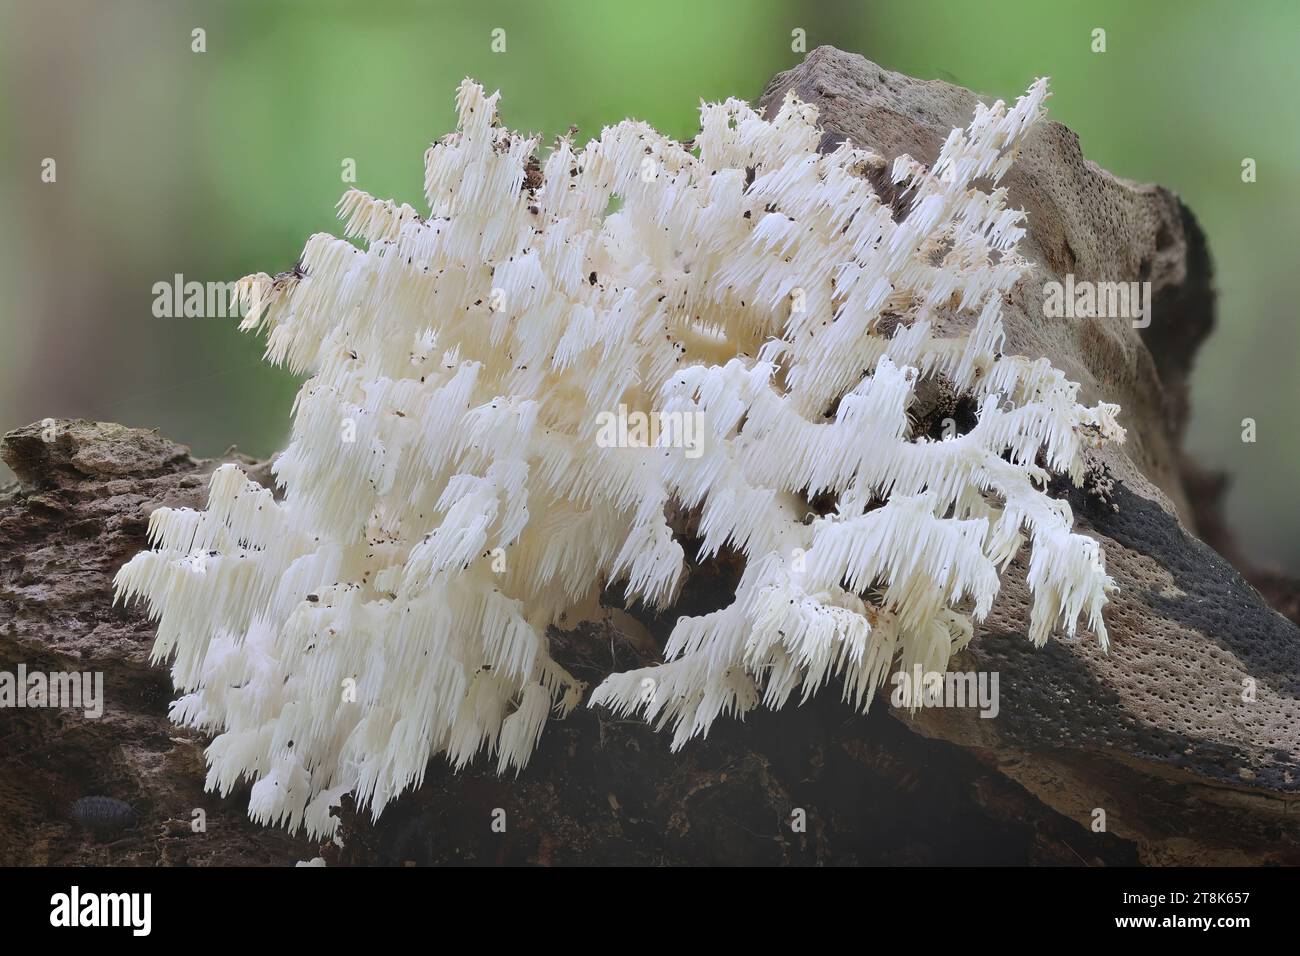 comb tooth mushroom, Coral tooth (Hericium coralloides, Hericium clathroides), on dead wood, Germany, Mecklenburg-Western Pomerania Stock Photo